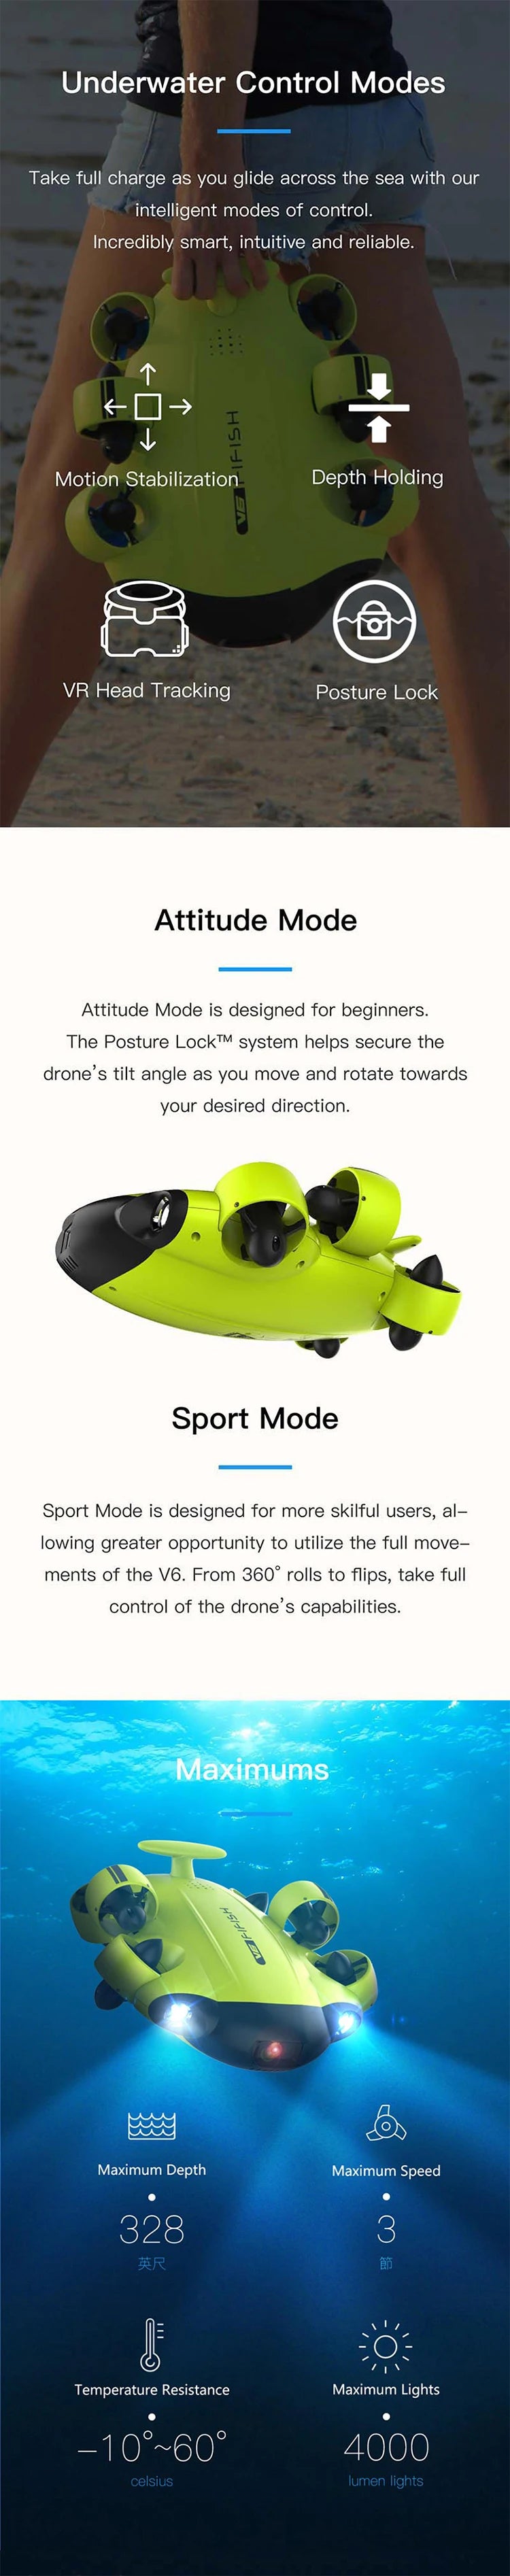 Fifish V6 - professional Underwater Drone, Fifish V6, underwater control modes take full charge as you glide across the sea with our intelligent modes of control